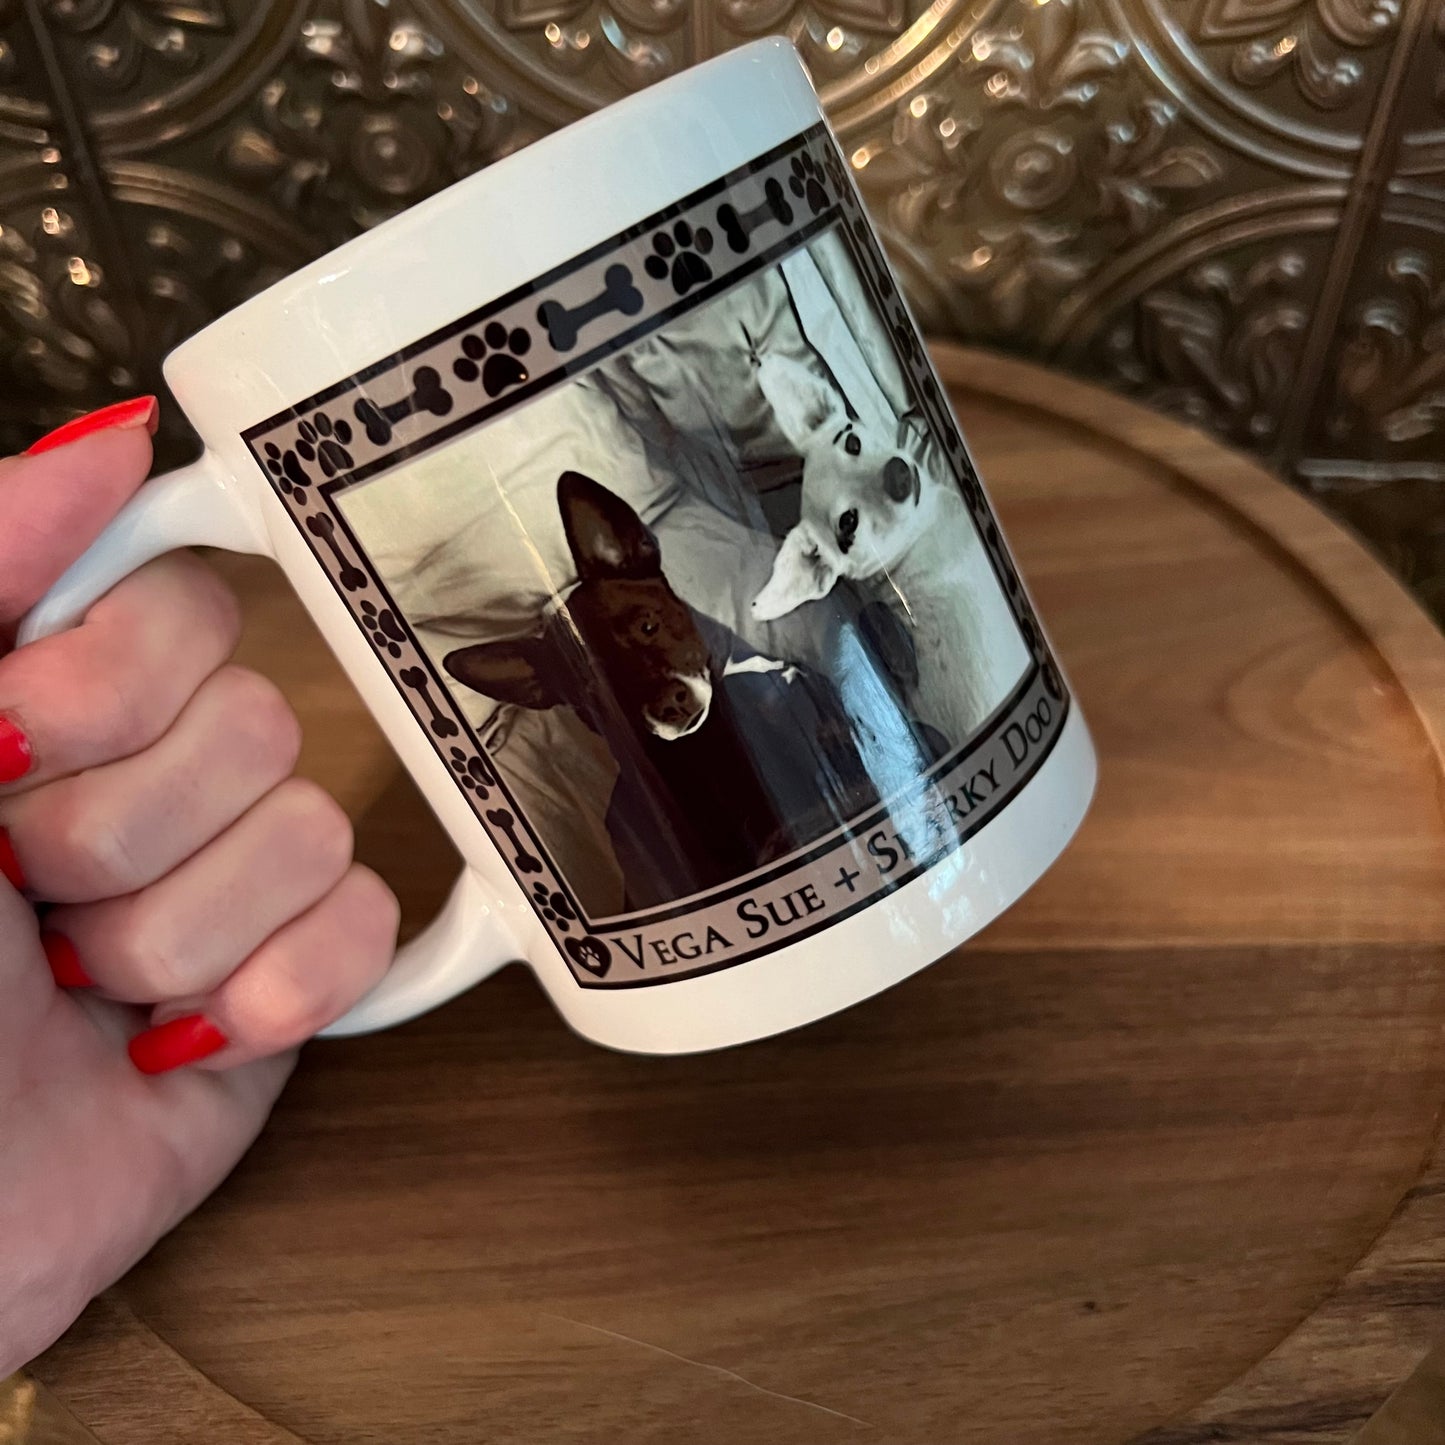 Custom Pet Coffee Mug l Personalized Pet Coffee Mug l Custom Pet Mug l Custom Pet Gift l Gifts for Her l Gifts for Him